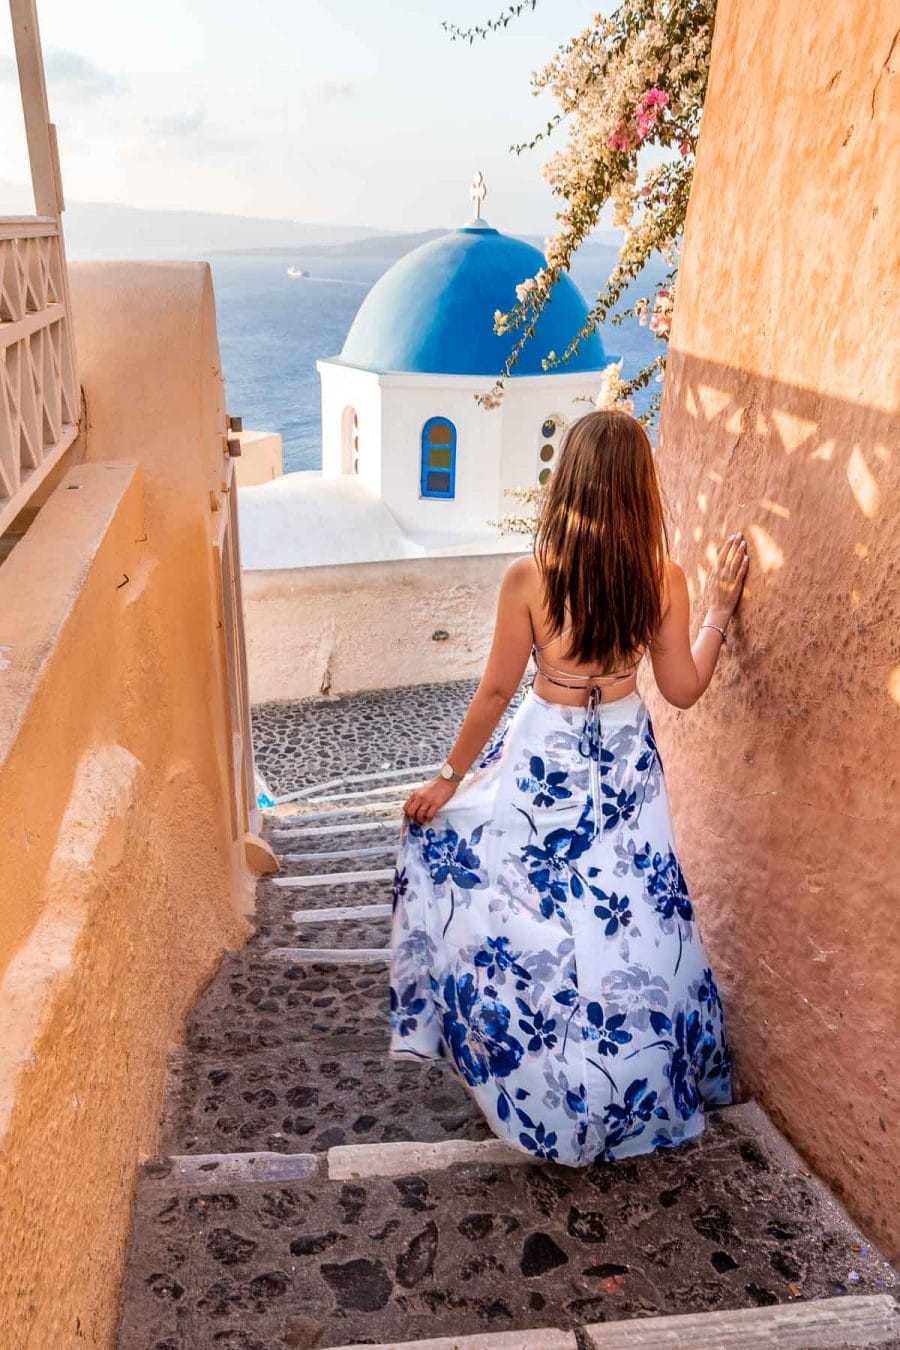 Girl in a blue floral dress walking down the stairs with a blue dome in front of her in Oia, Santorini